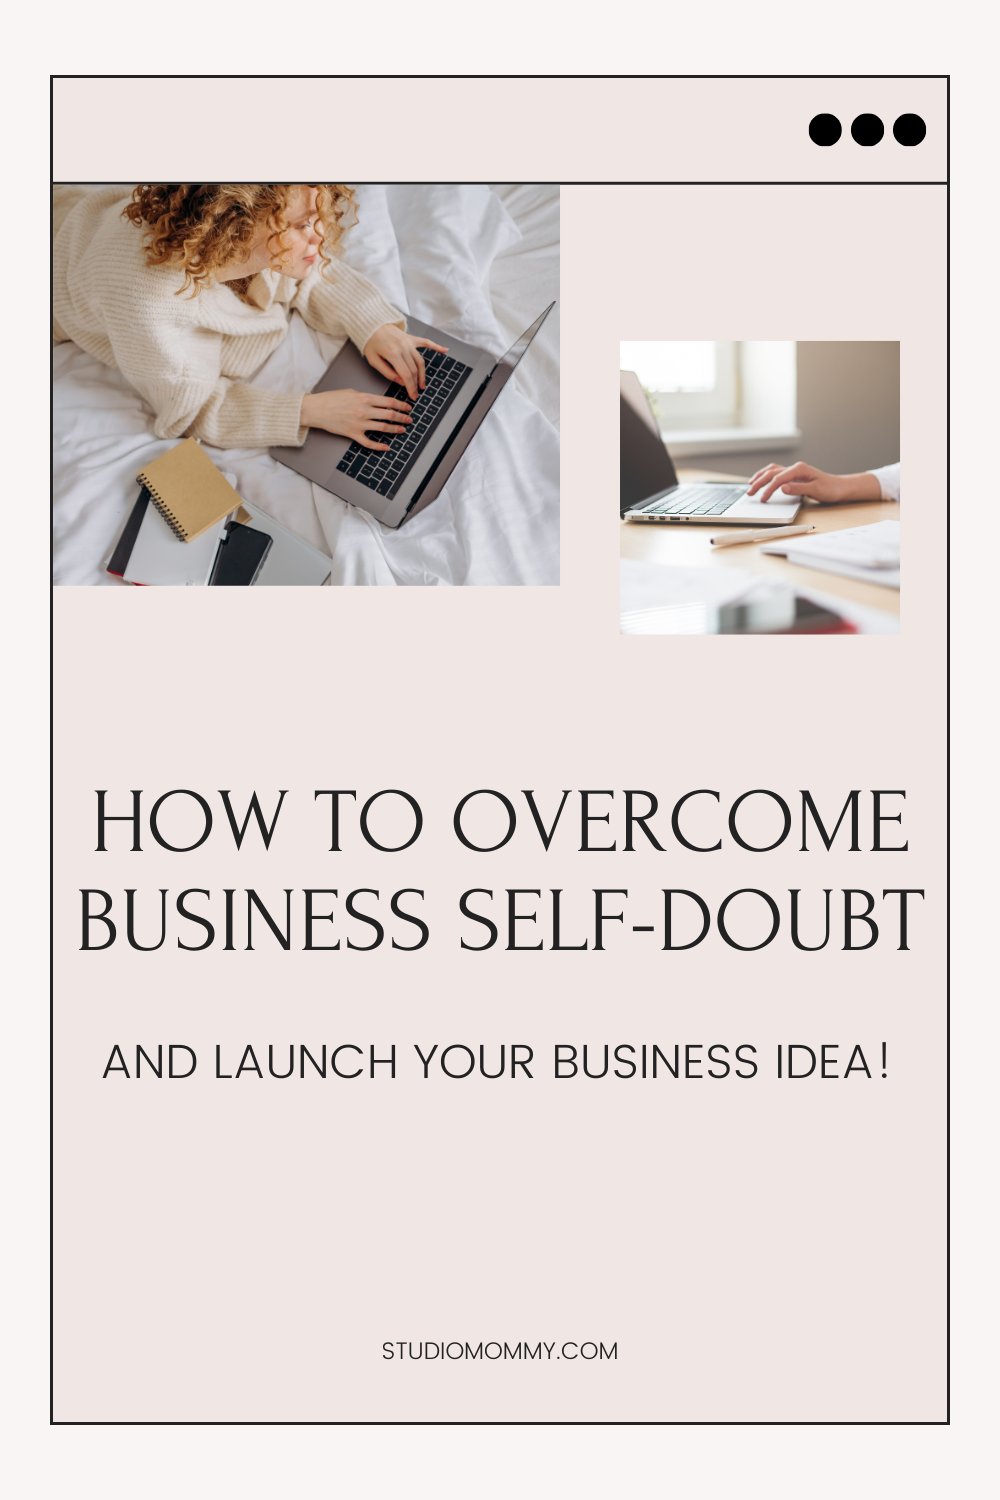 How to overcome business self-doubt